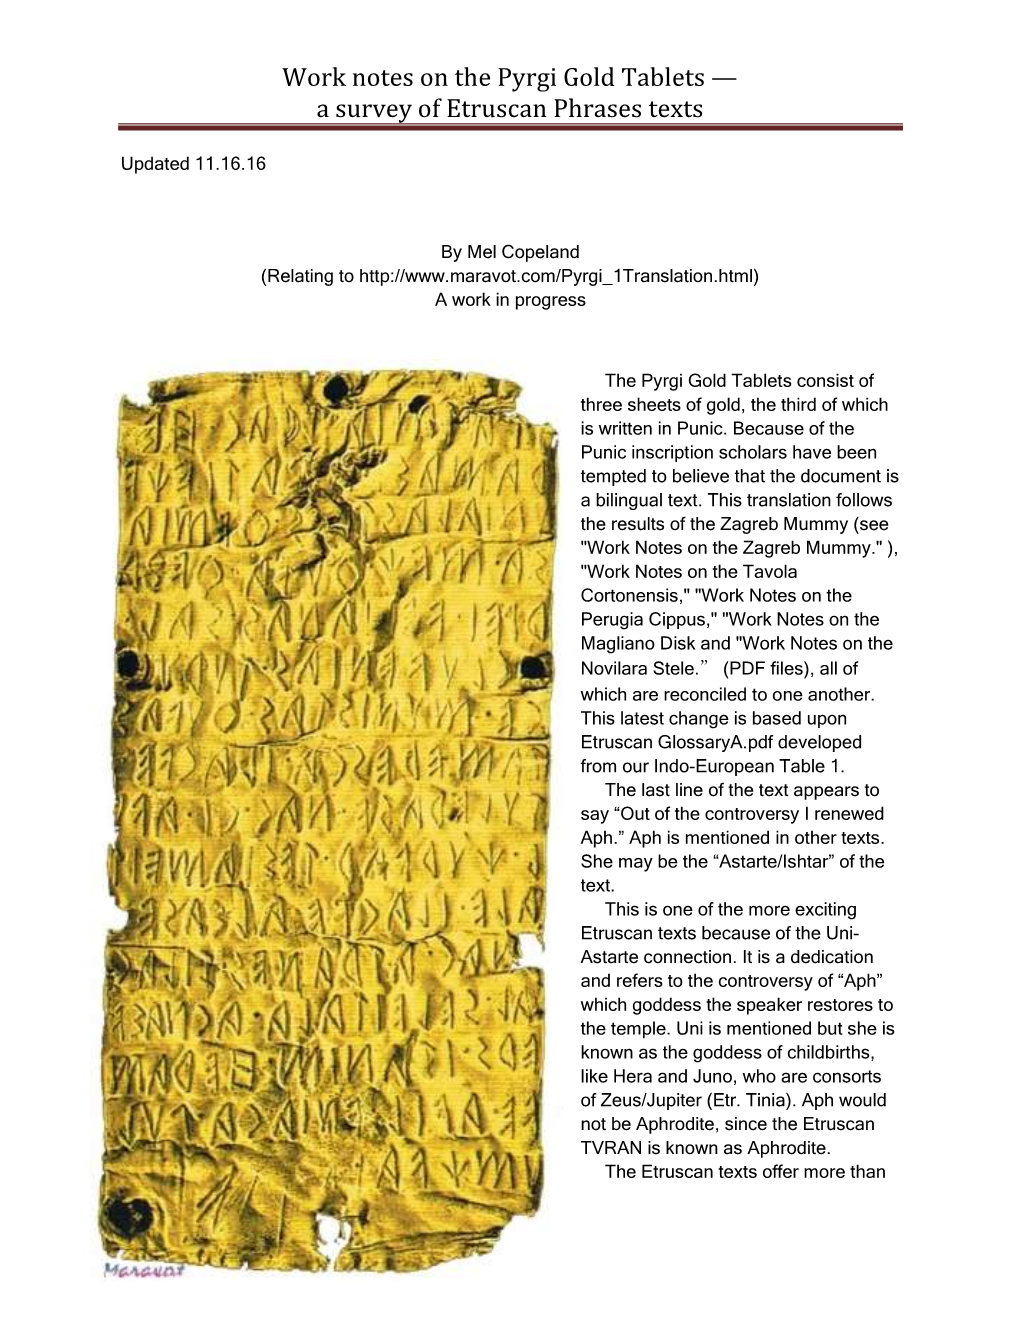 Work Notes on the Pyrgi Gold Tablets — a Survey of Etruscan Phrases Texts